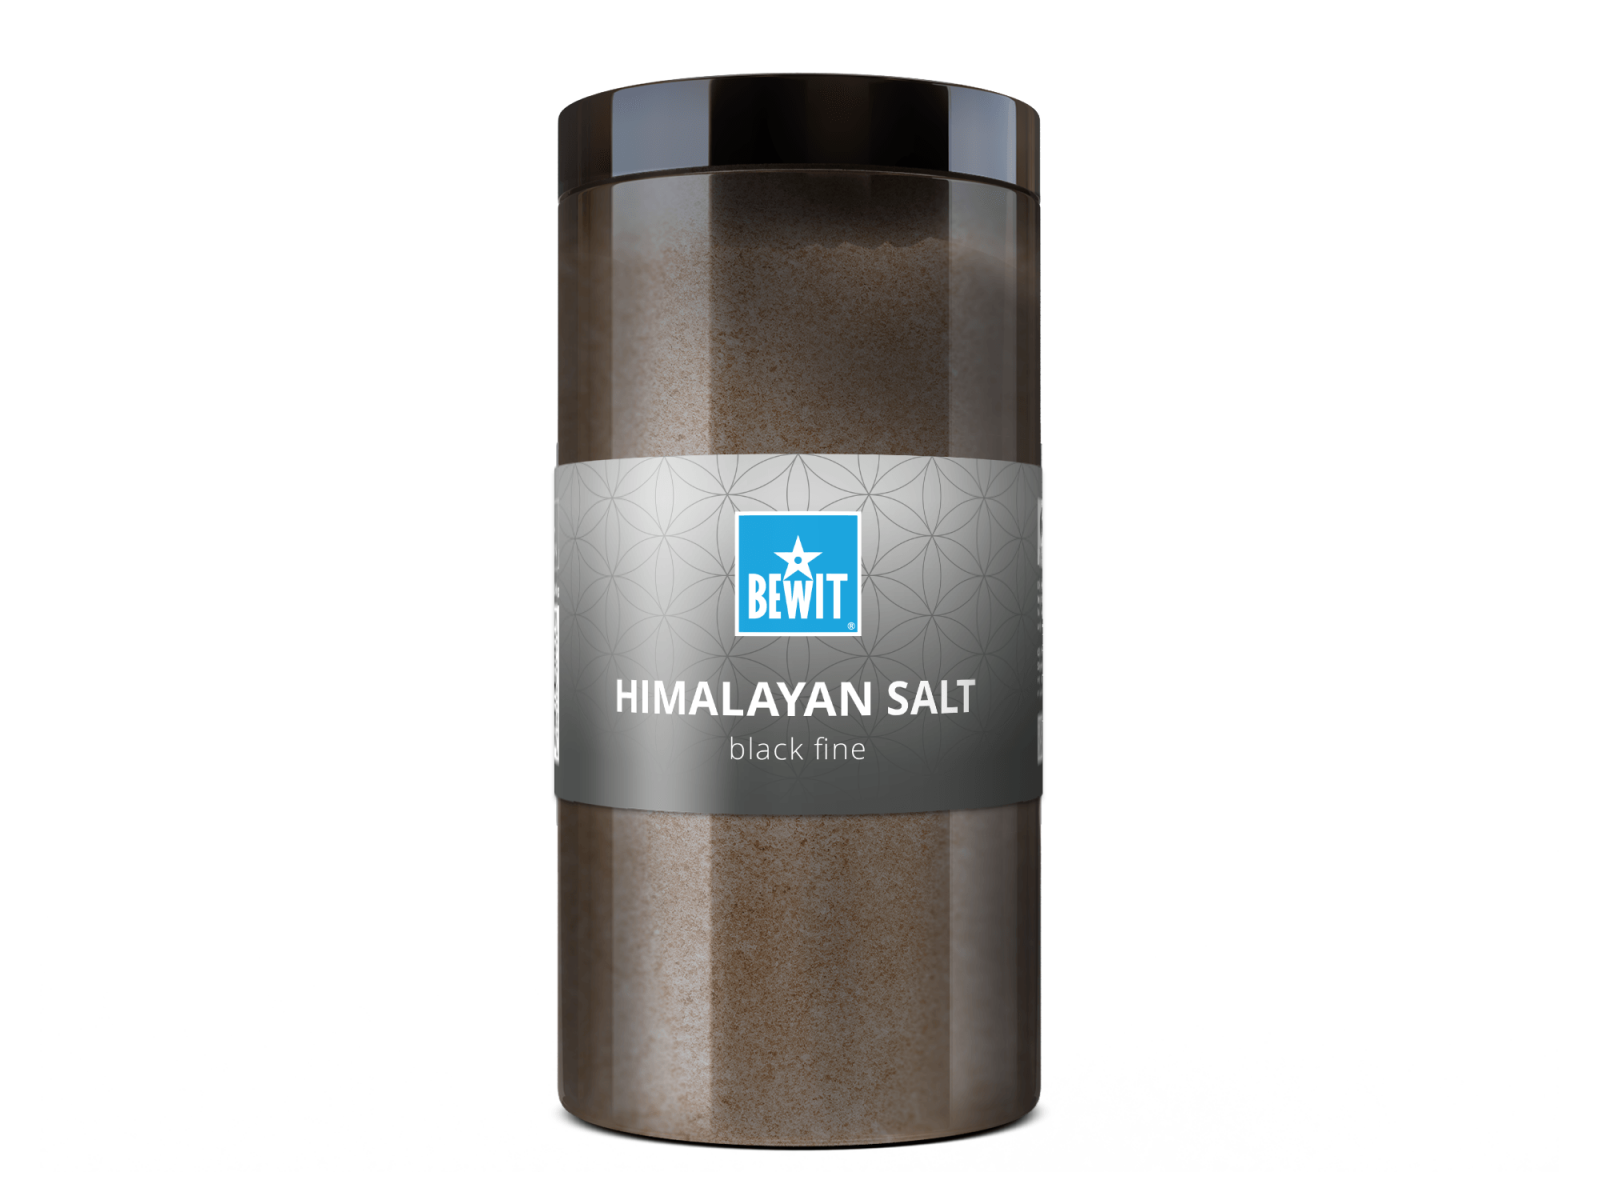 BEWIT Himalayan black salt, finely ground - A superfood - 3